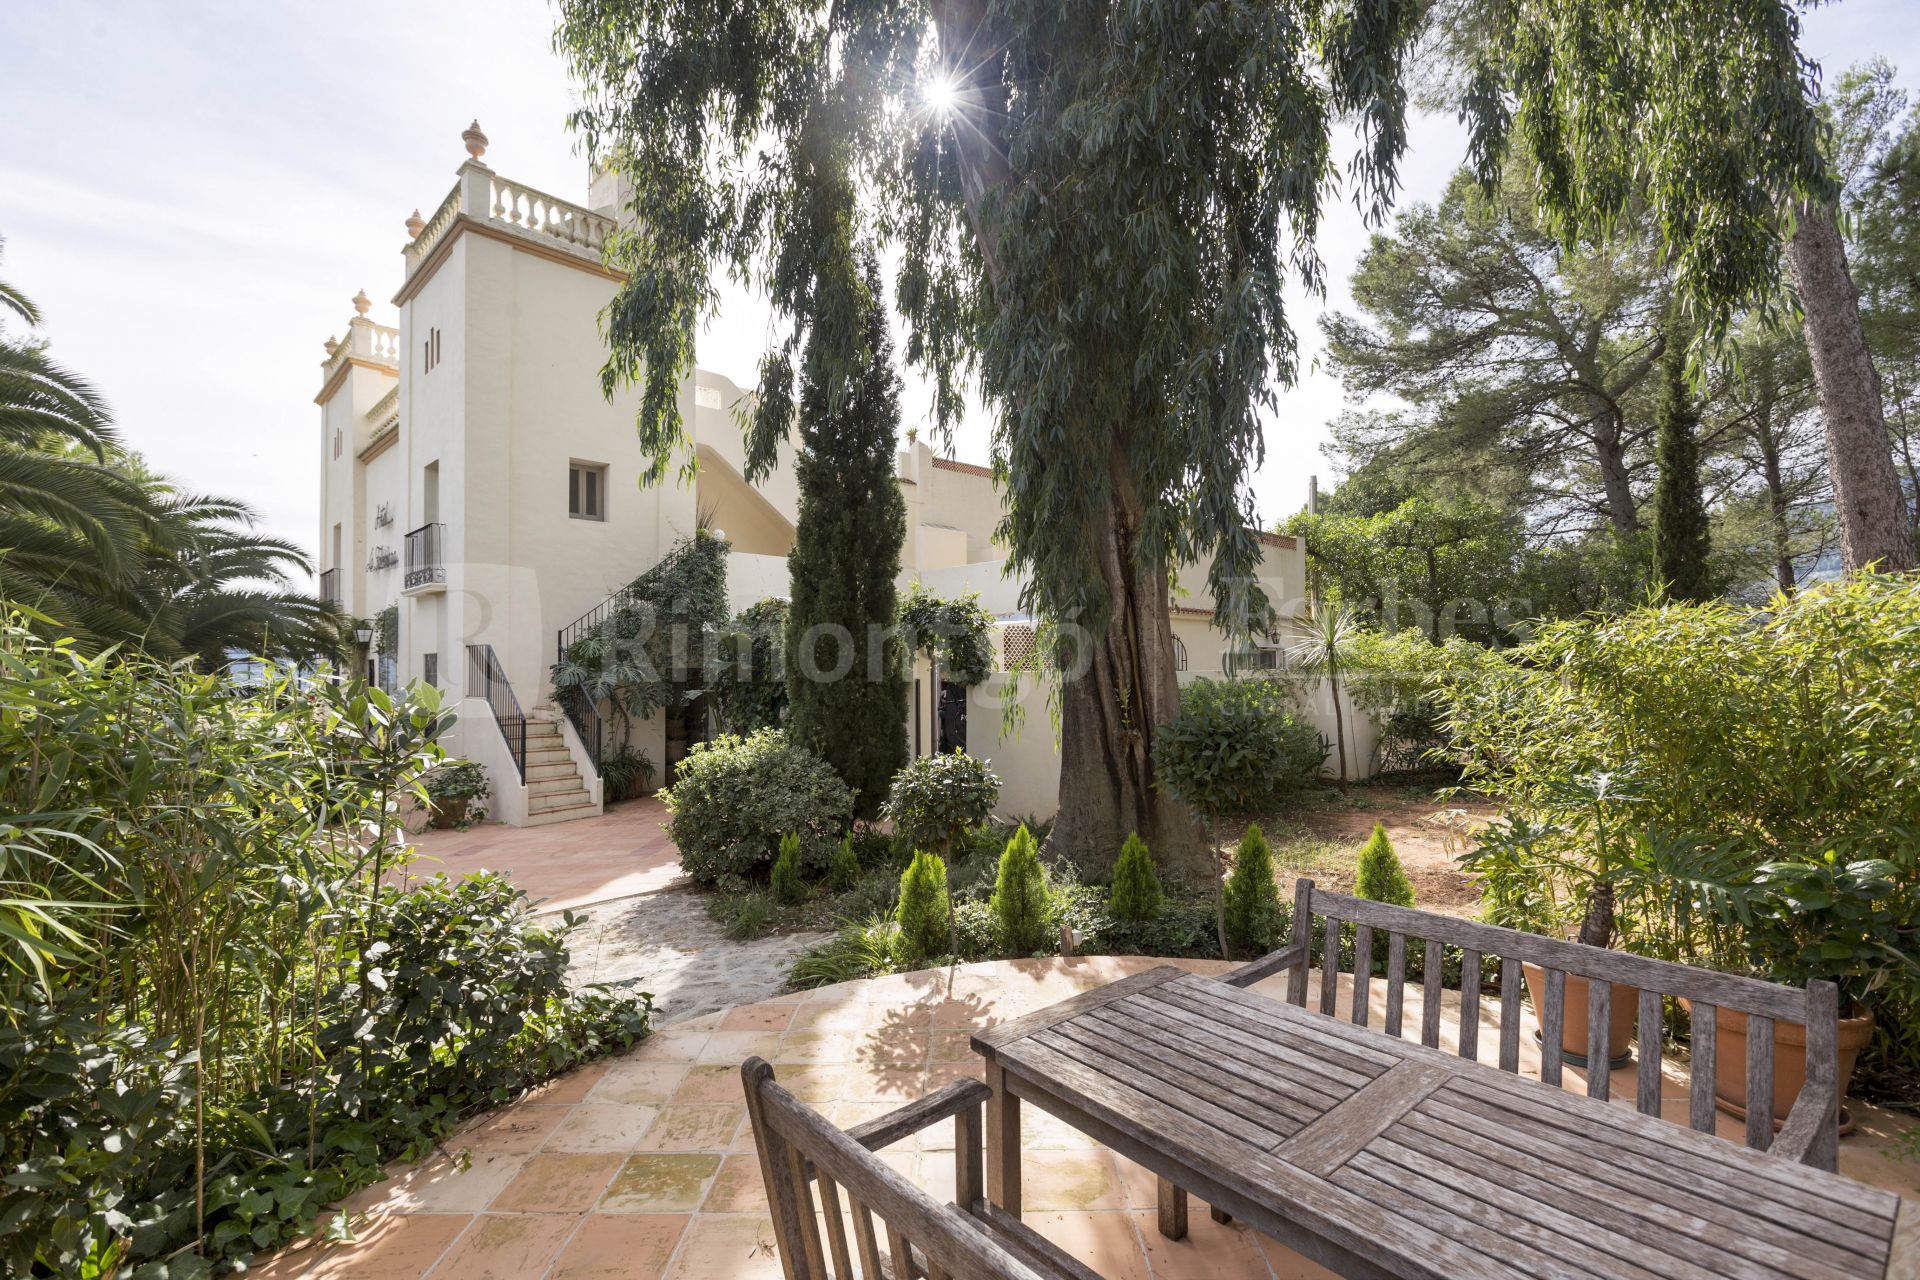 Small hotel in the middle of nature 5km from Gandía for sale.